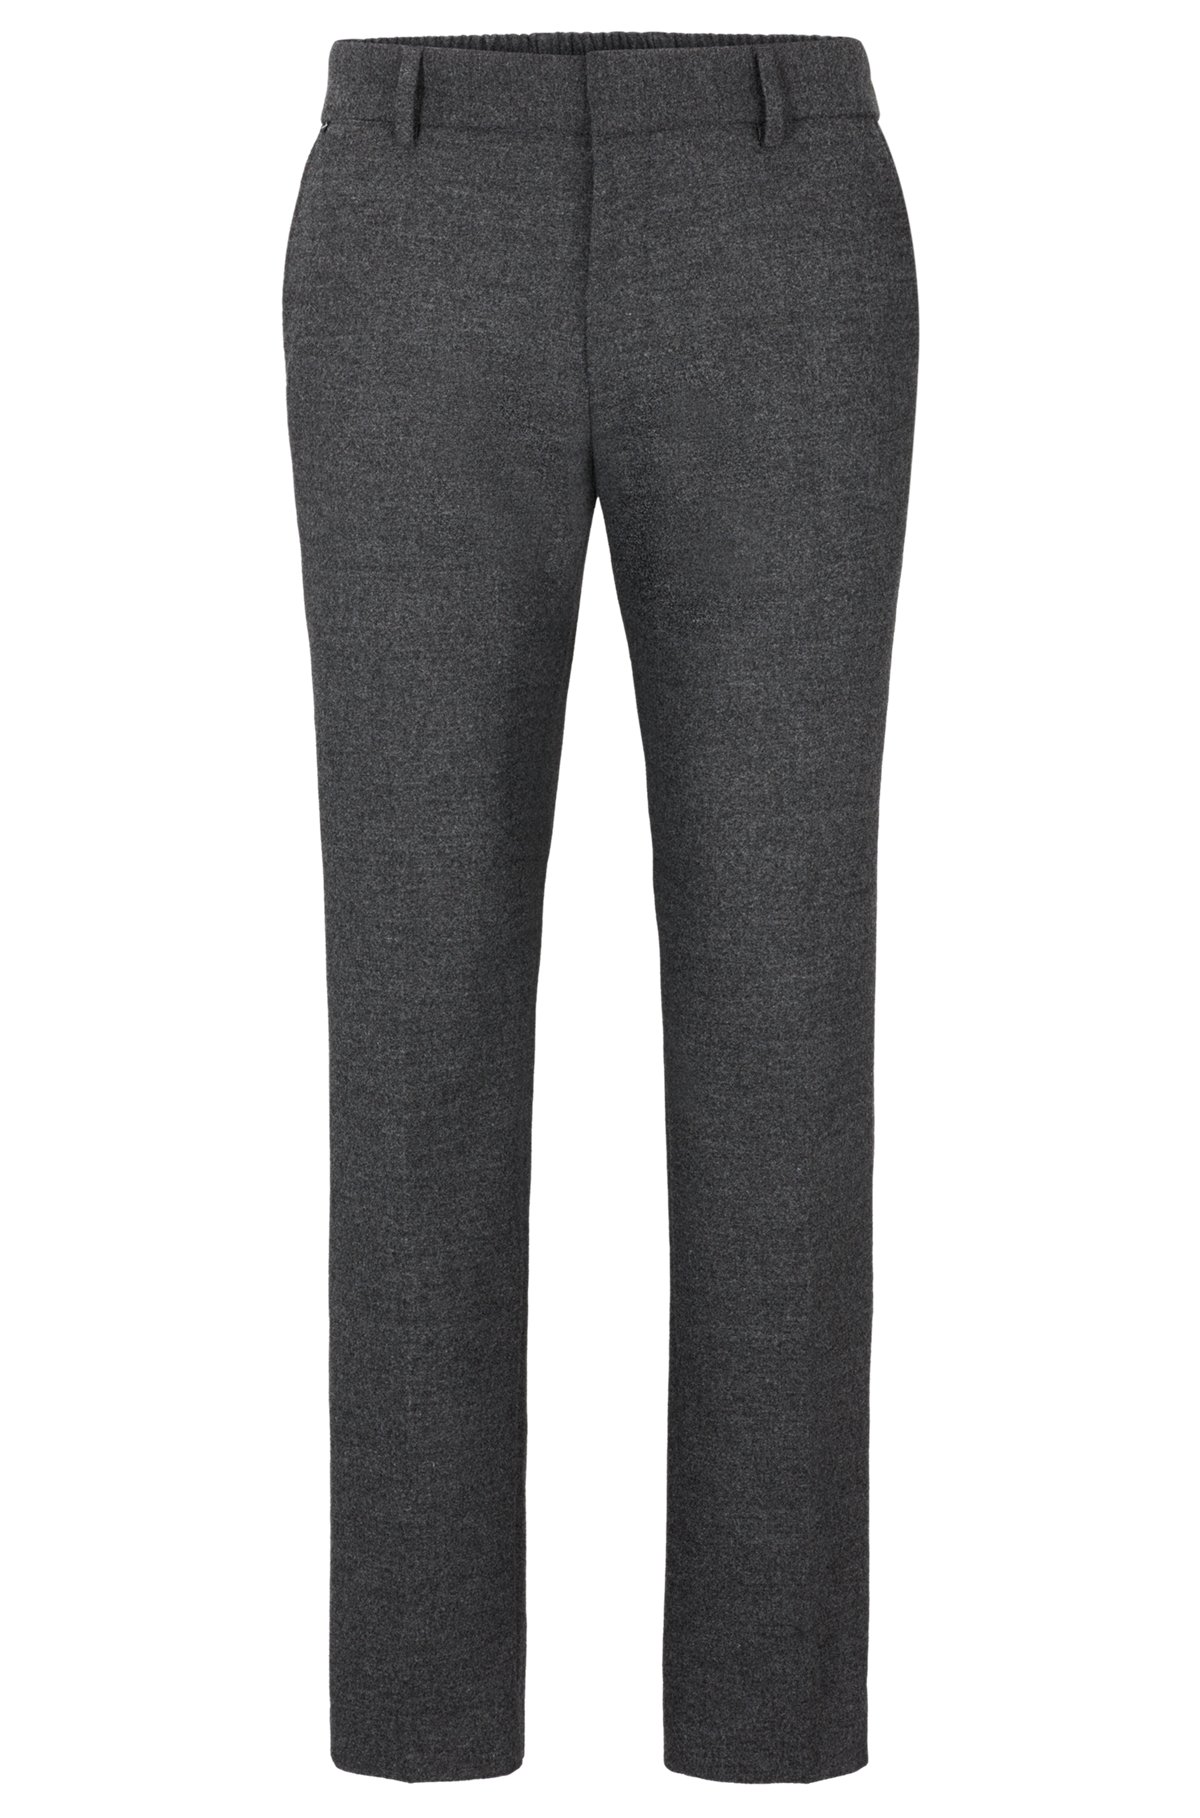 BOSS - Slim-fit formal trousers in stretch material